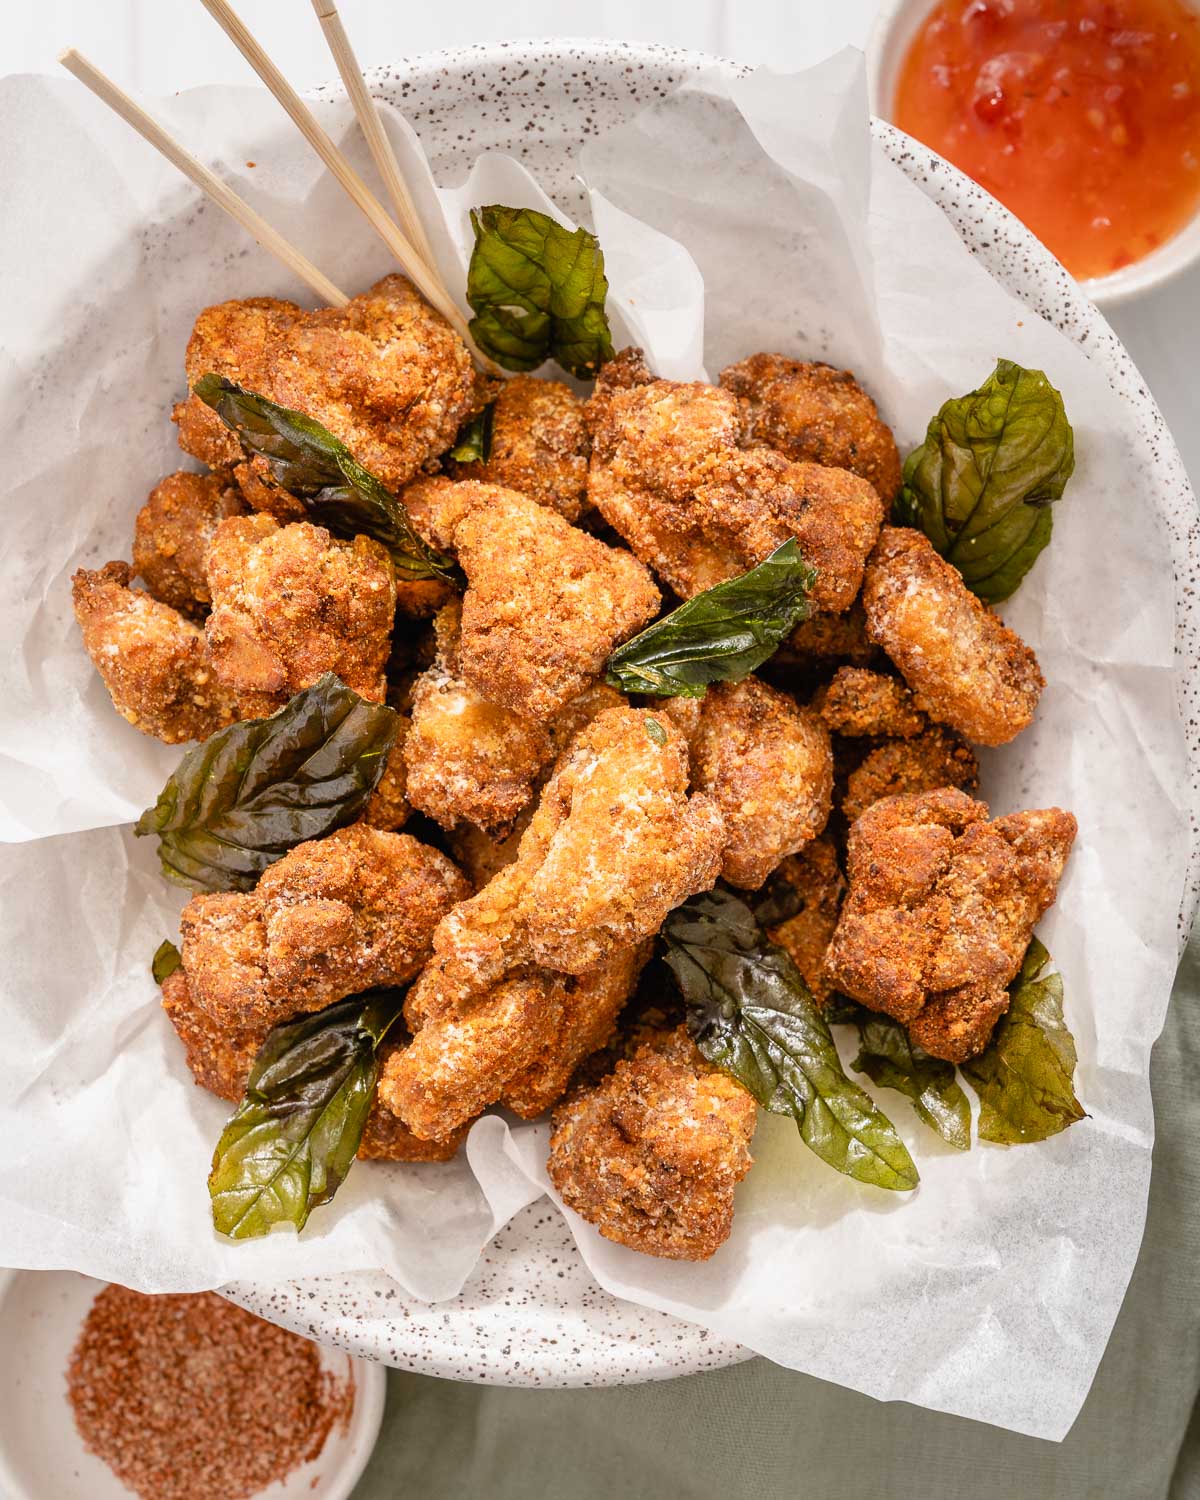 Looking down into a bowl of Taiwanese fried chicken with fried basil and skewers for eating.